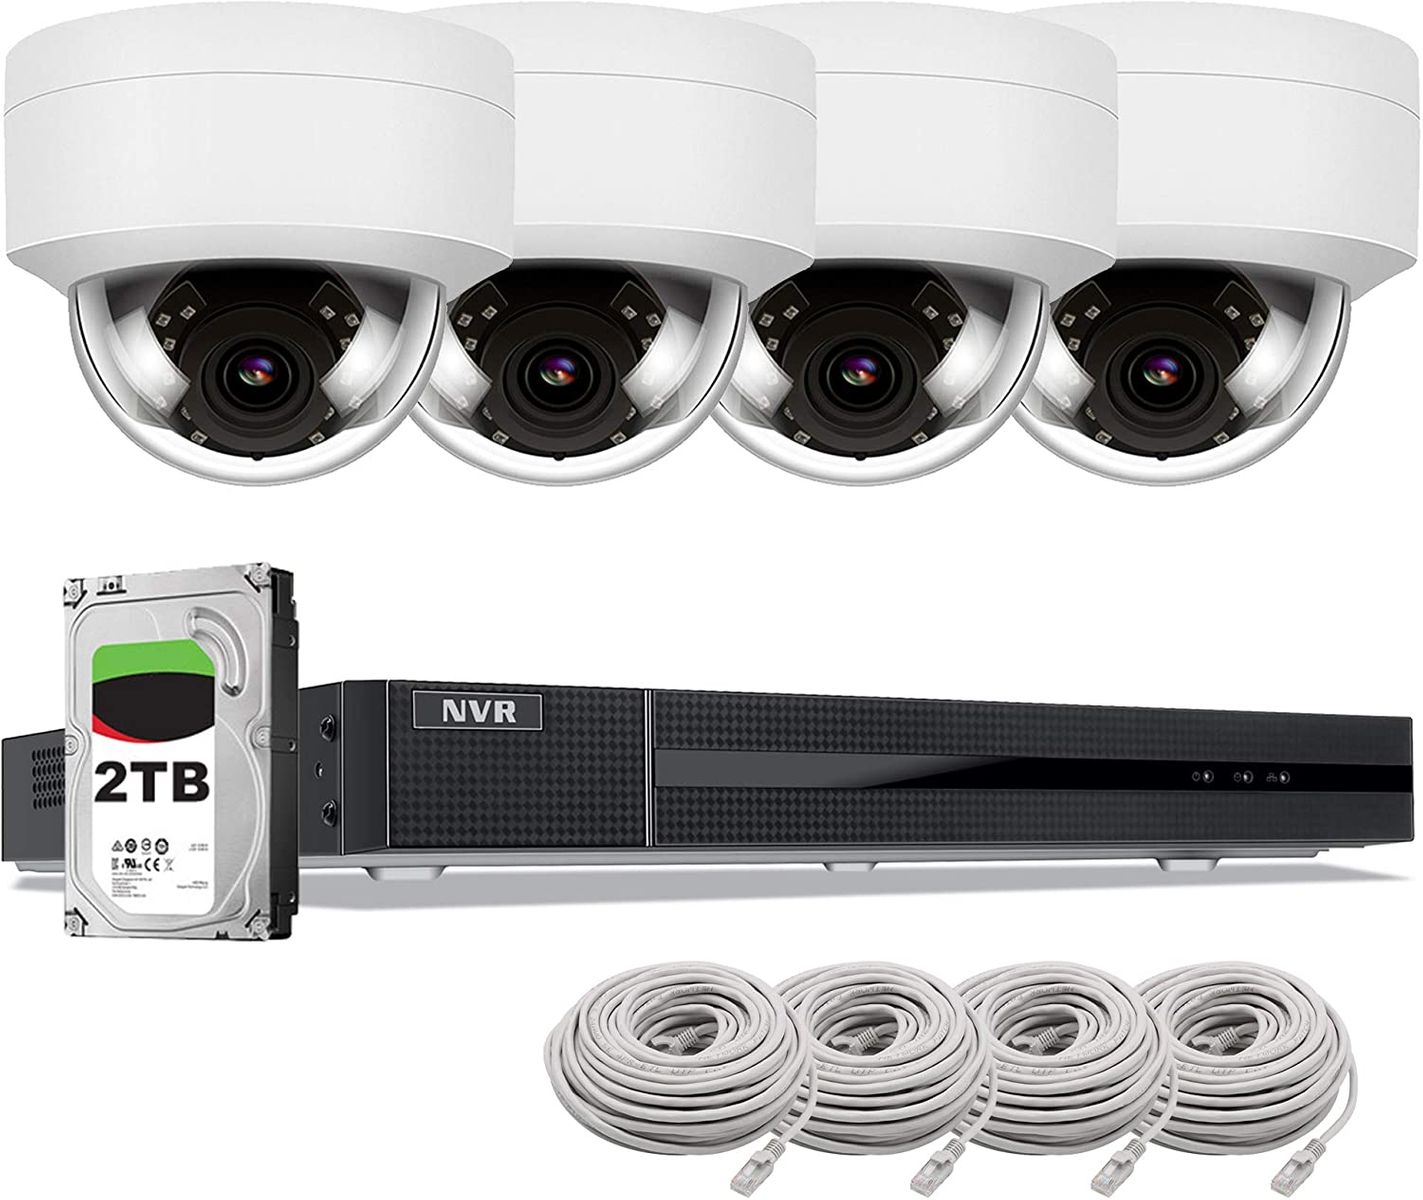 Anpviz 4K NVR 8MP POE CCTV Camera System 8CH Security System with 2tb 4X HD 8MP Dome Camera PoE Outdoor Waterproof IR Microphone Motion Detection IVMS4200 Hik-Connect NVR Four pack